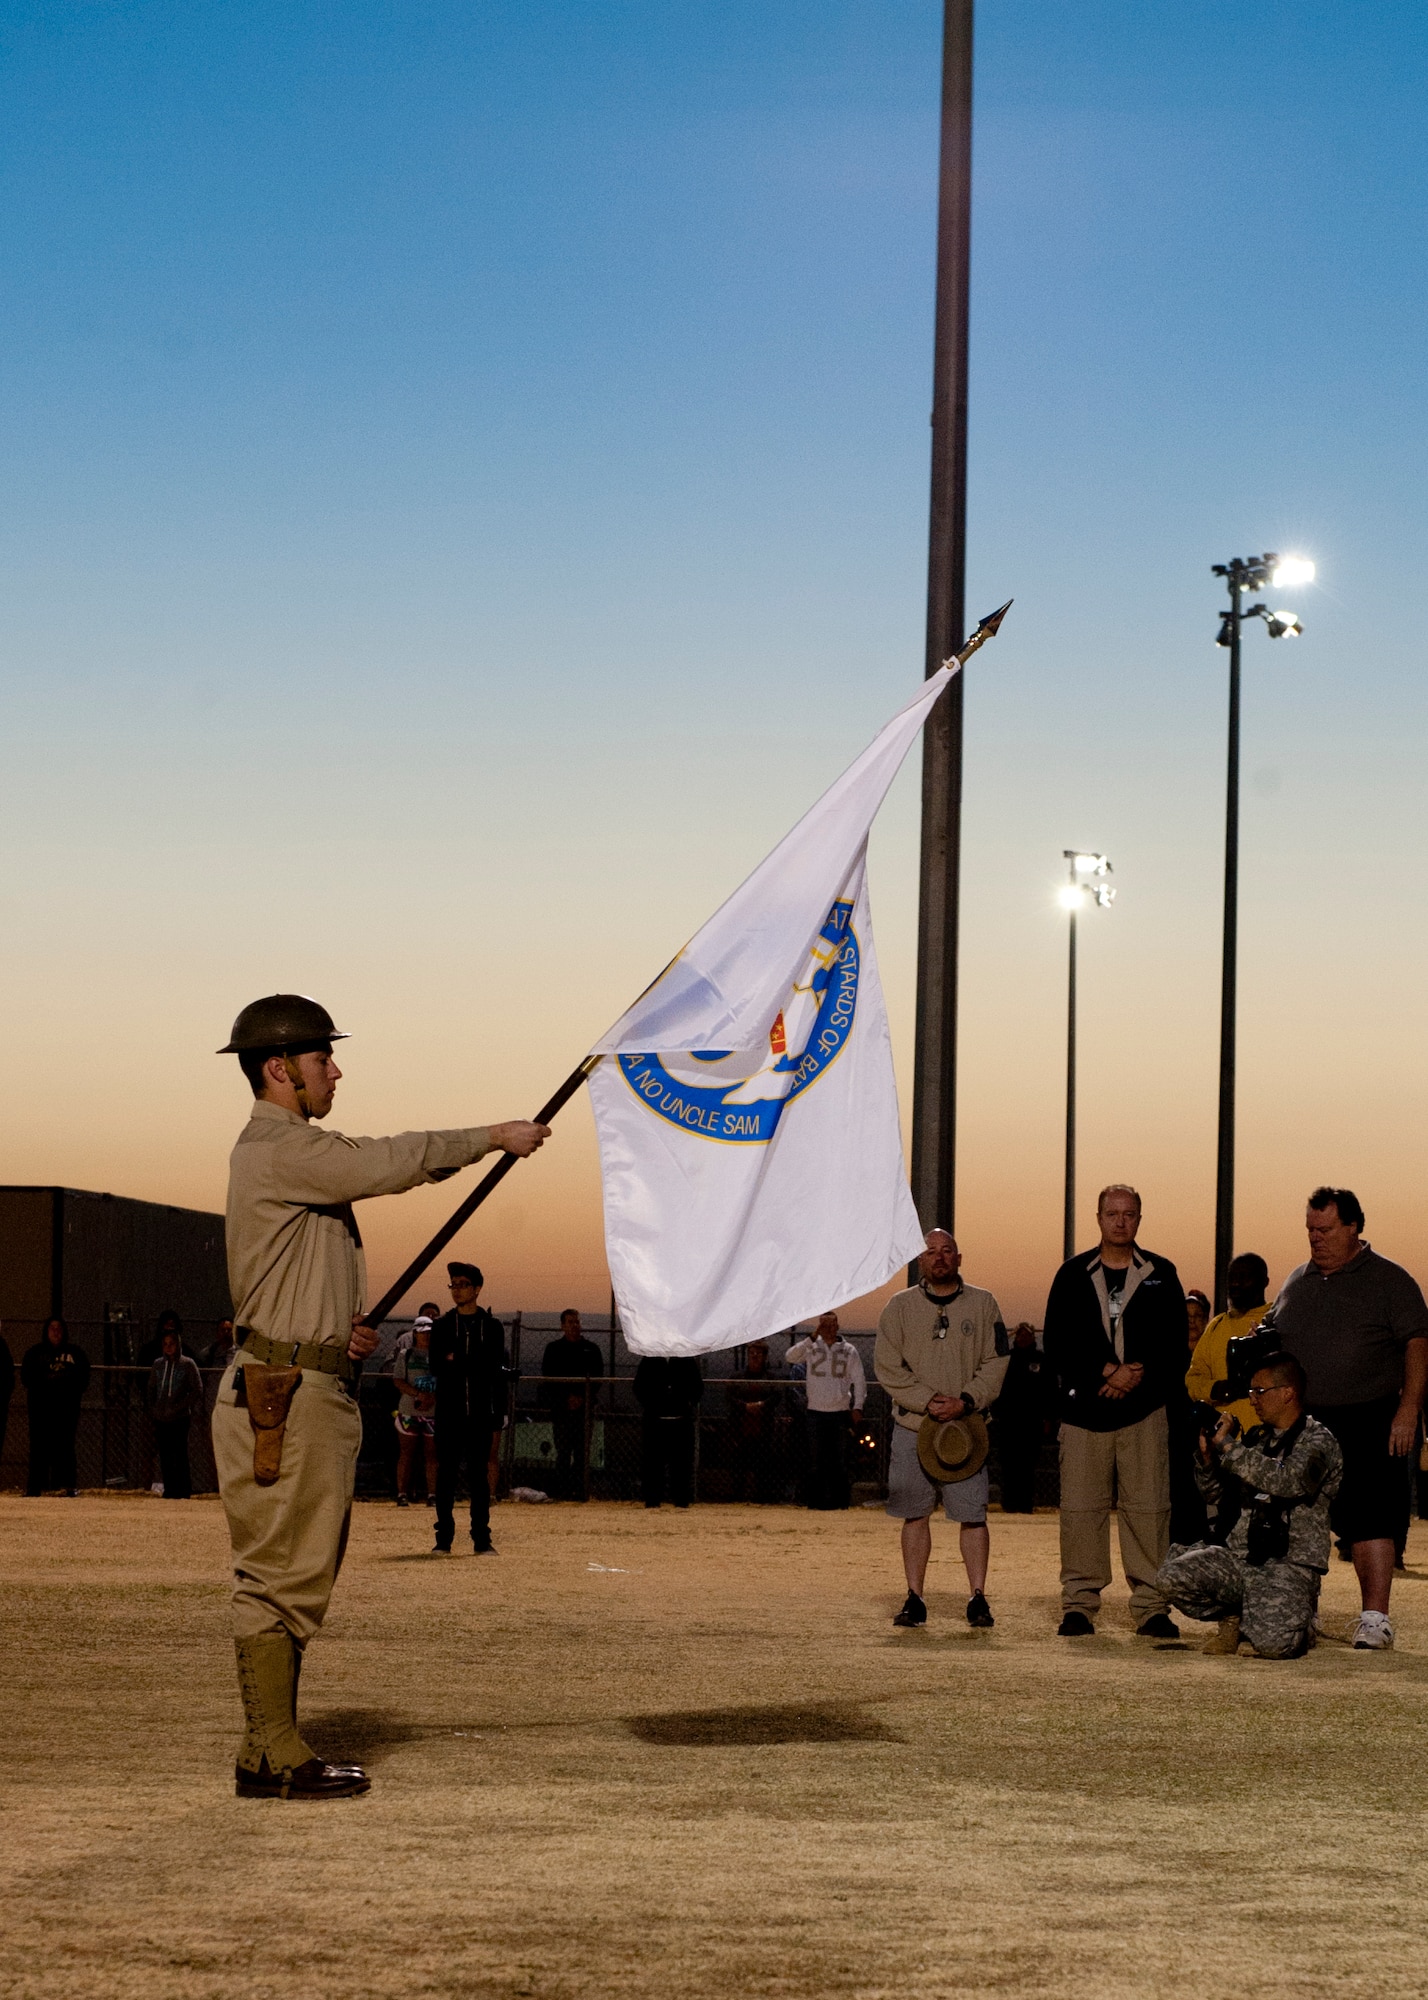 A U.S. Army service member posts the flag of the Battling Bastards of Bataan at the opening ceremony of the 24th annual Bataan Memorial Death March at White Sands Missile Range, N.M., March 17. More than 5,800 people who were from across the world participated in the 26.2-milememorial marathon to honor the 76,000 prisoners of war forced to endure marching nearly 80 miles under brutal conditions during World War II. The event began around 7 a.m., and the course stayed open until 8 p.m., when darkness fell, and it was no longer safe for participants to continue. (U.S.  Air Force photo by Airman 1st Class Daniel E. Liddicoet/Released)